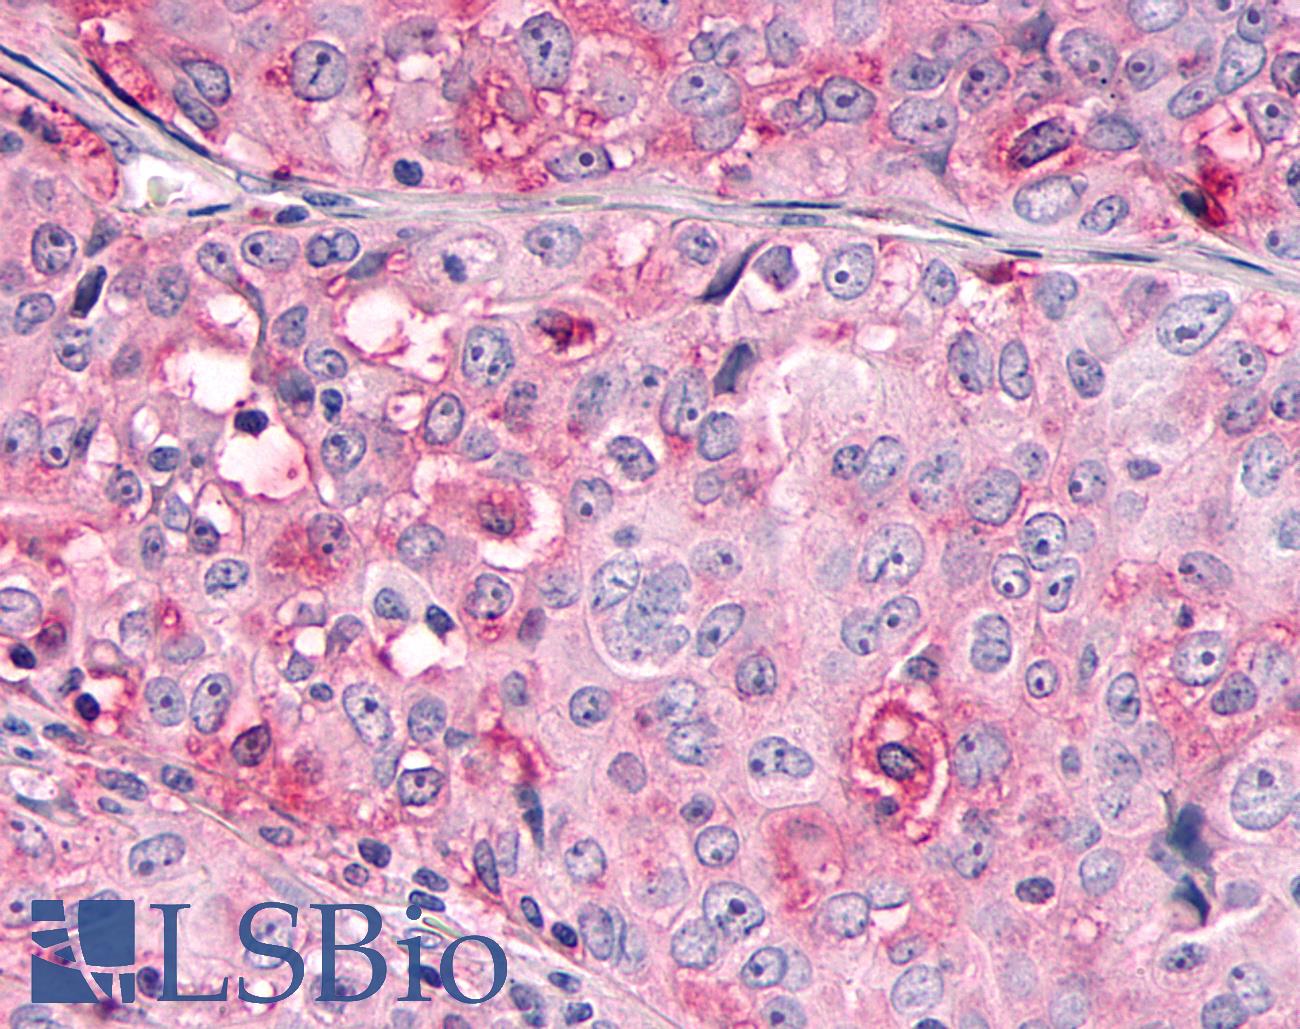 OR10R2 Antibody - Anti-OR10R2 antibody IHC of human Ovary, Carcinoma. Immunohistochemistry of formalin-fixed, paraffin-embedded tissue after heat-induced antigen retrieval.